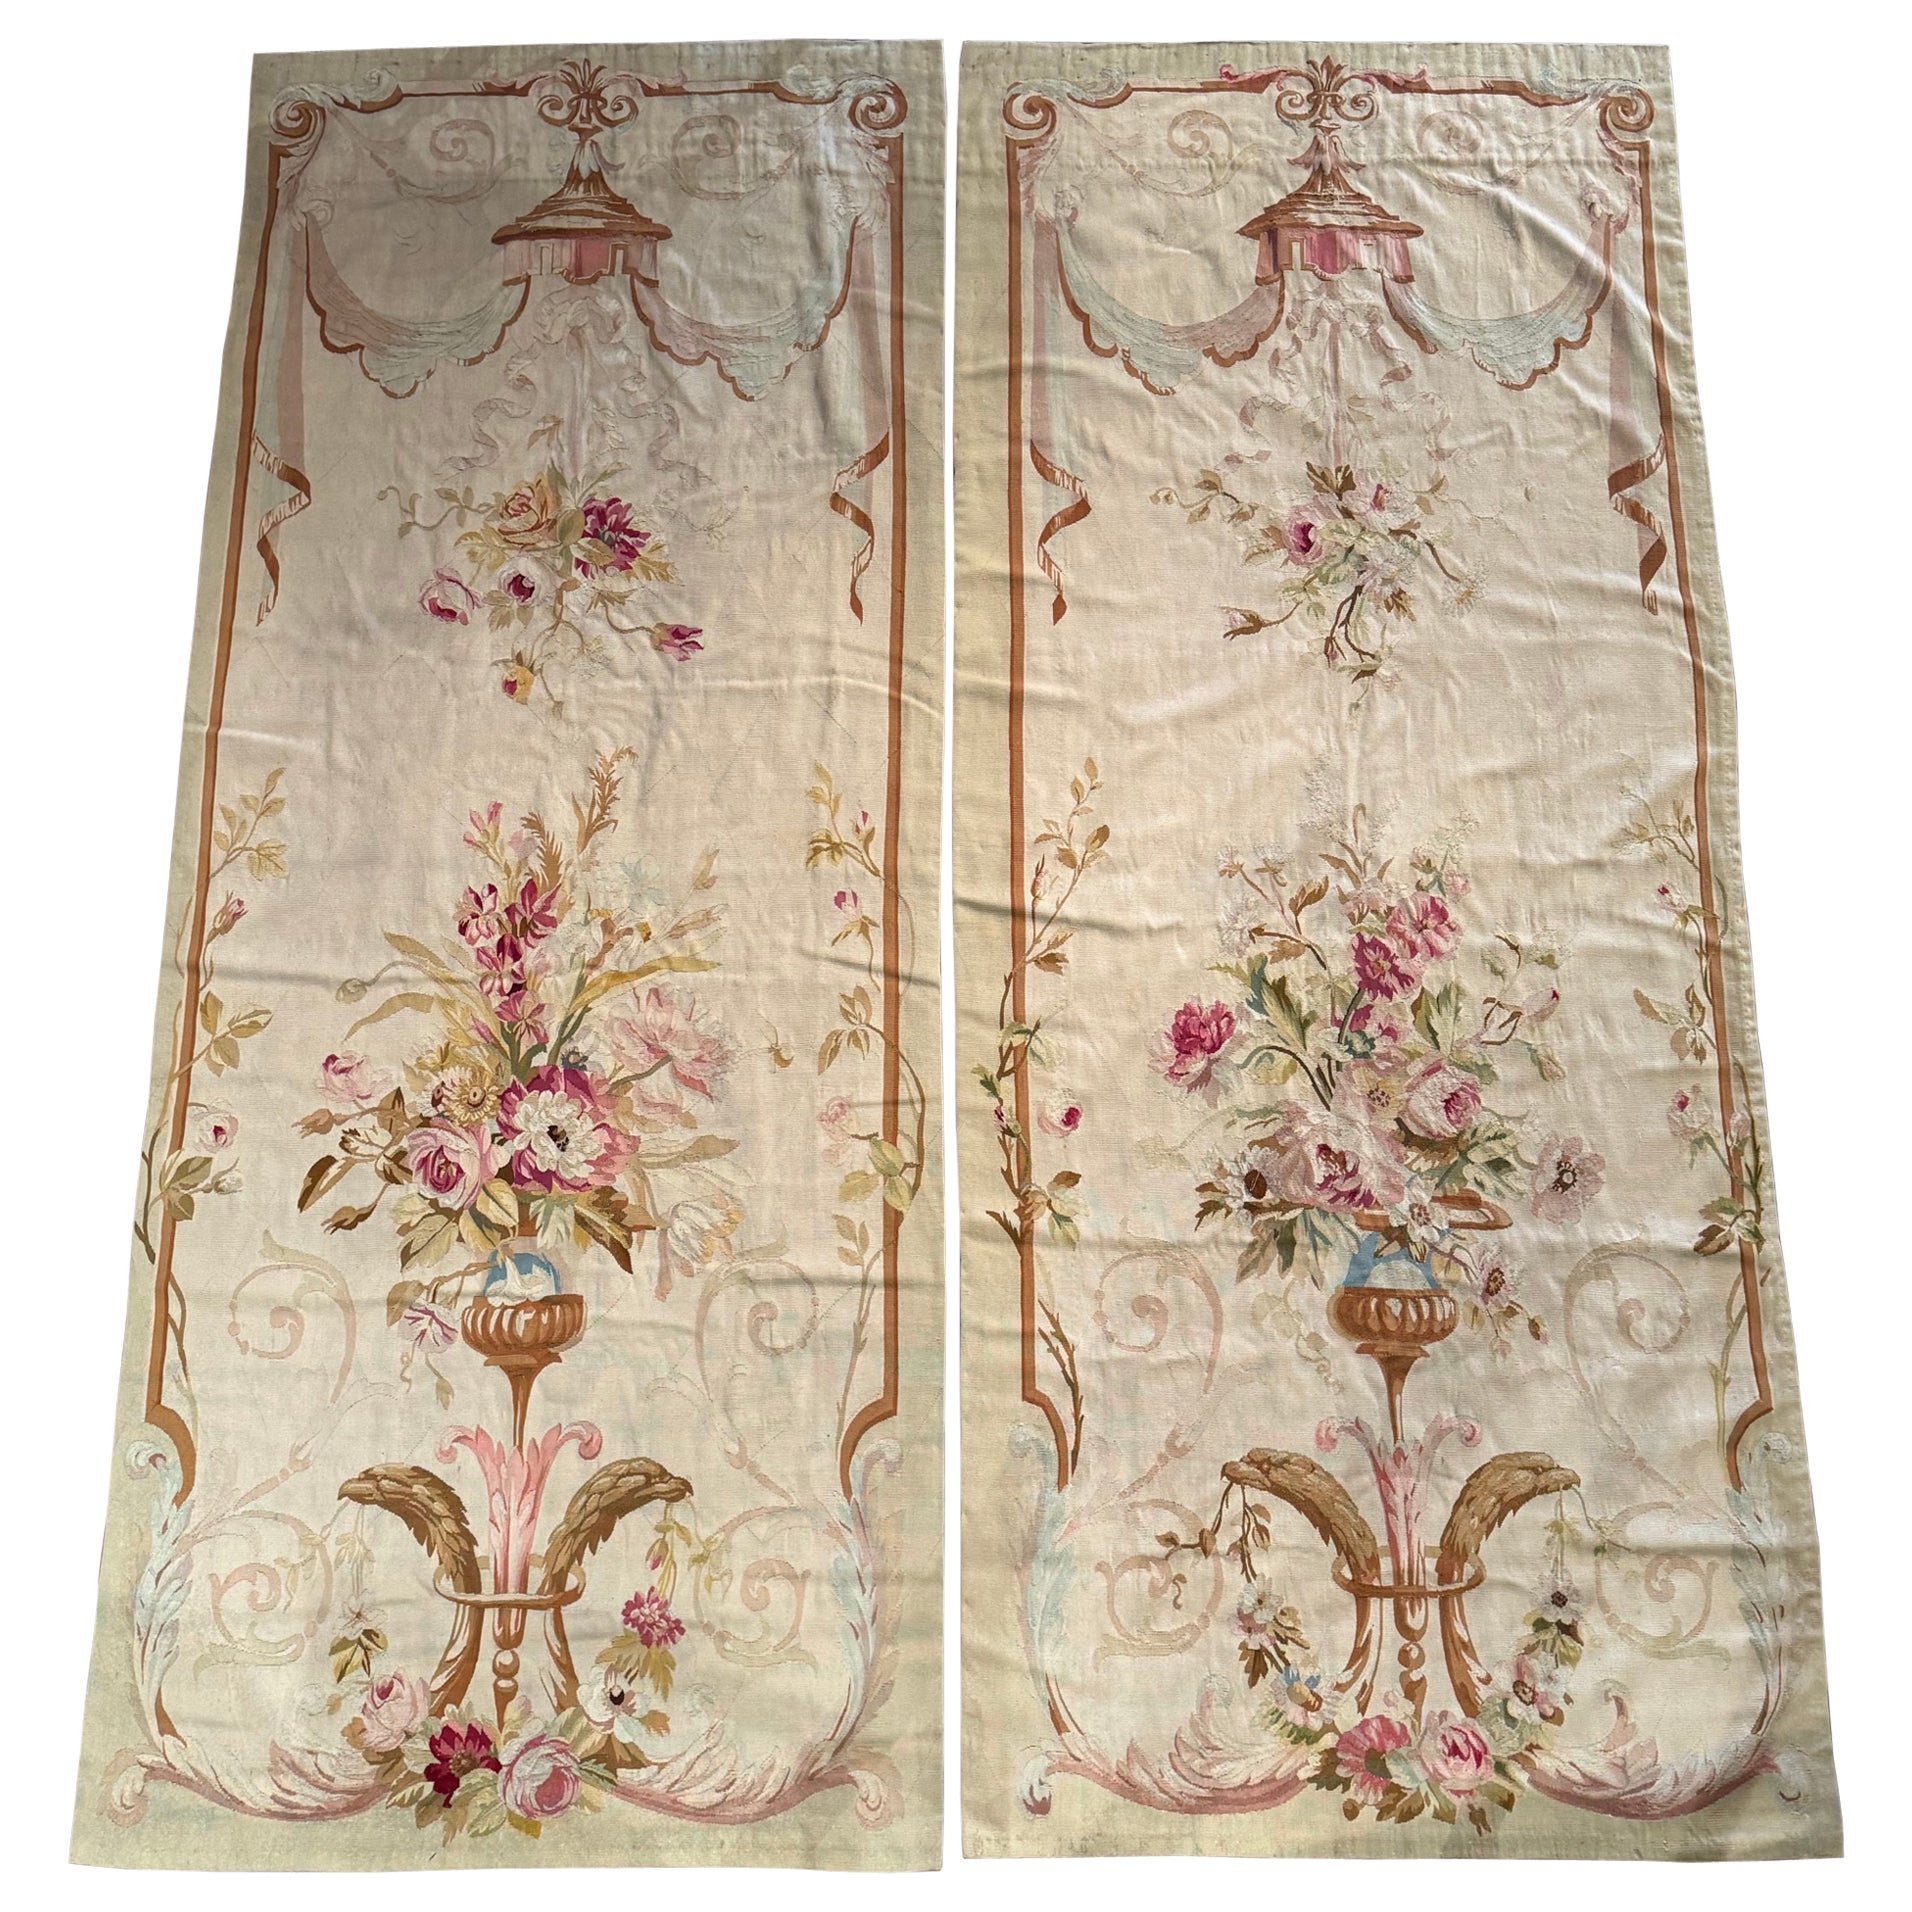 What is Aubusson fabric?